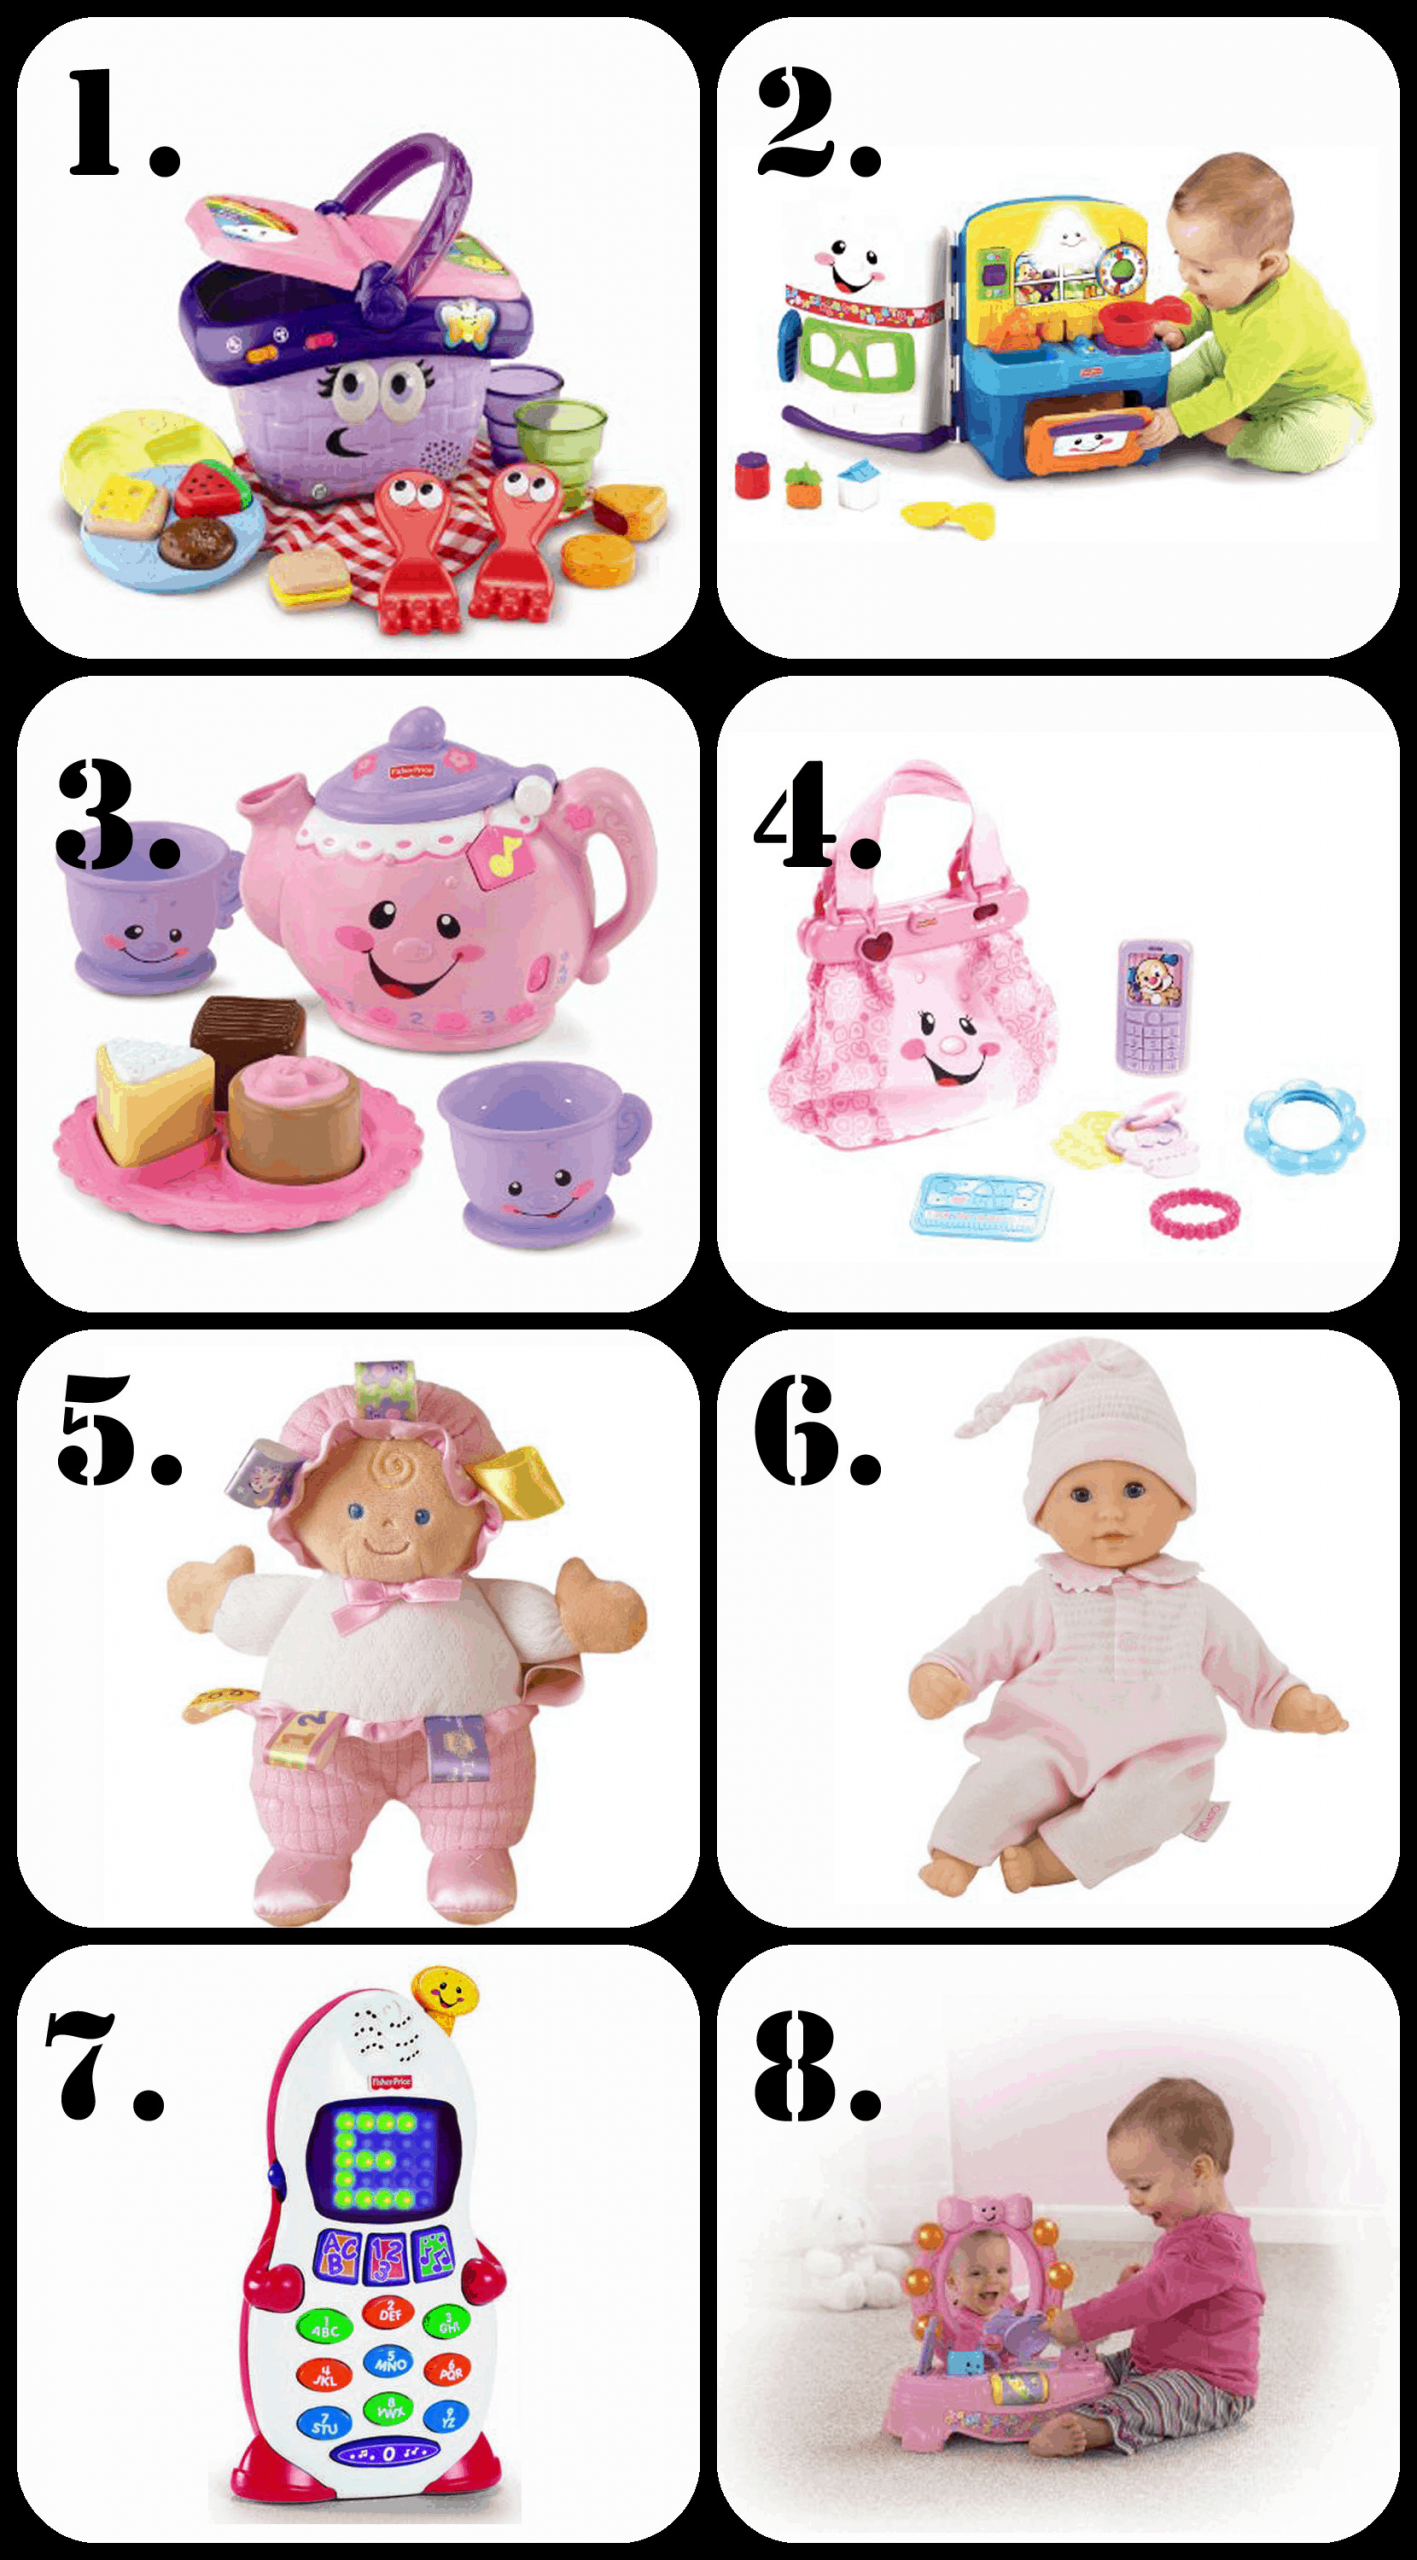 Gifts For A 1 Year Old Child
 The Ultimate List of Gift Ideas for a 1 Year Old Girl